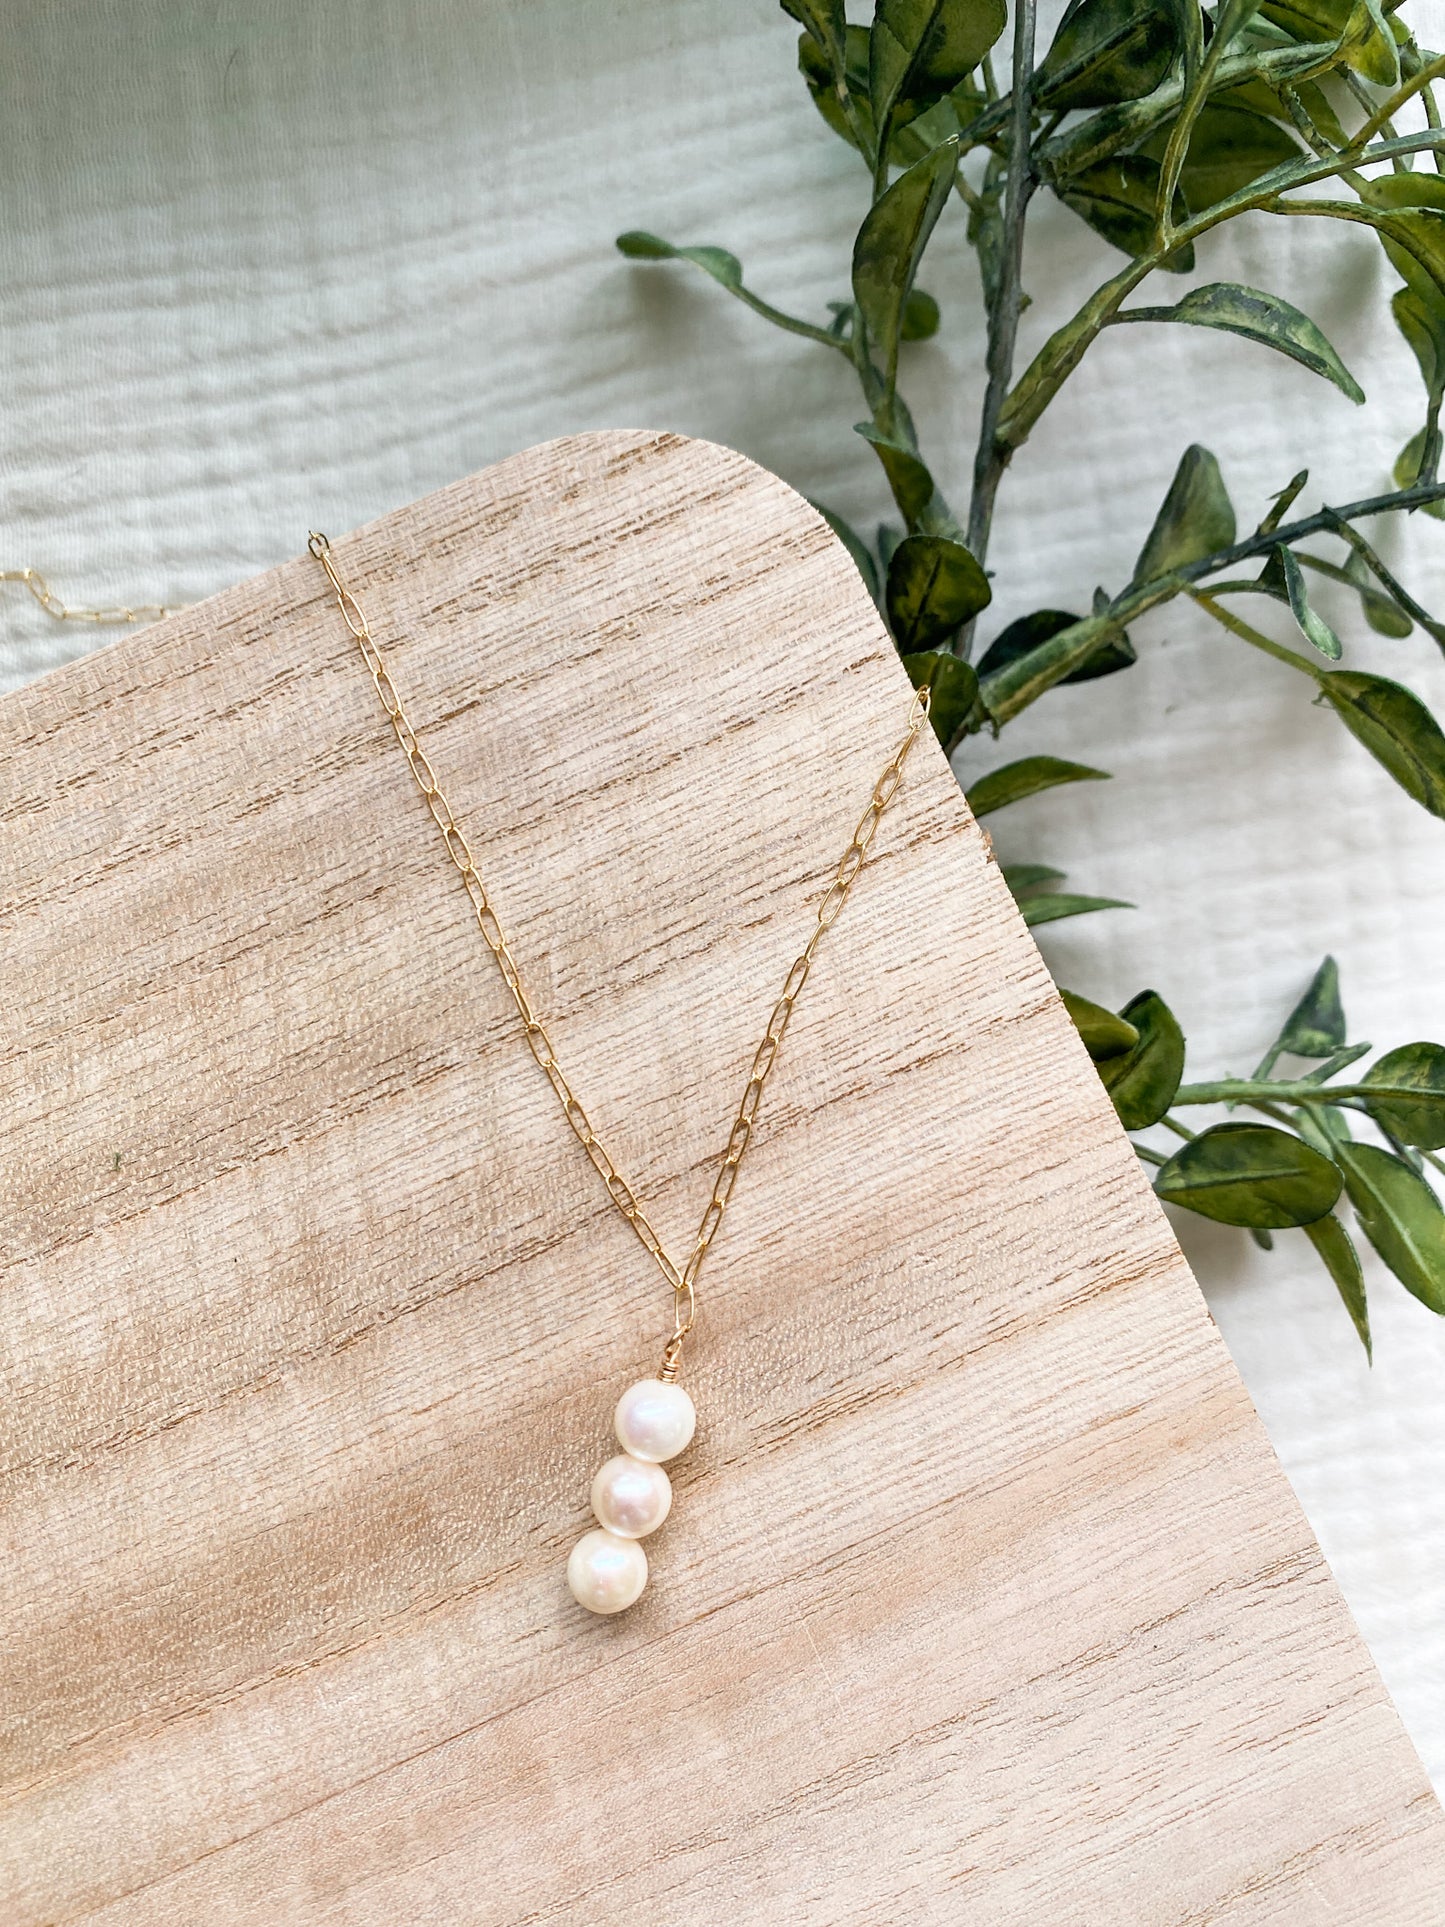 3 Pearl Necklace | Paperclip Chain Necklace | Freshwater Pearls |  Gold Fill Necklace | 18 Inch adjustable Chain